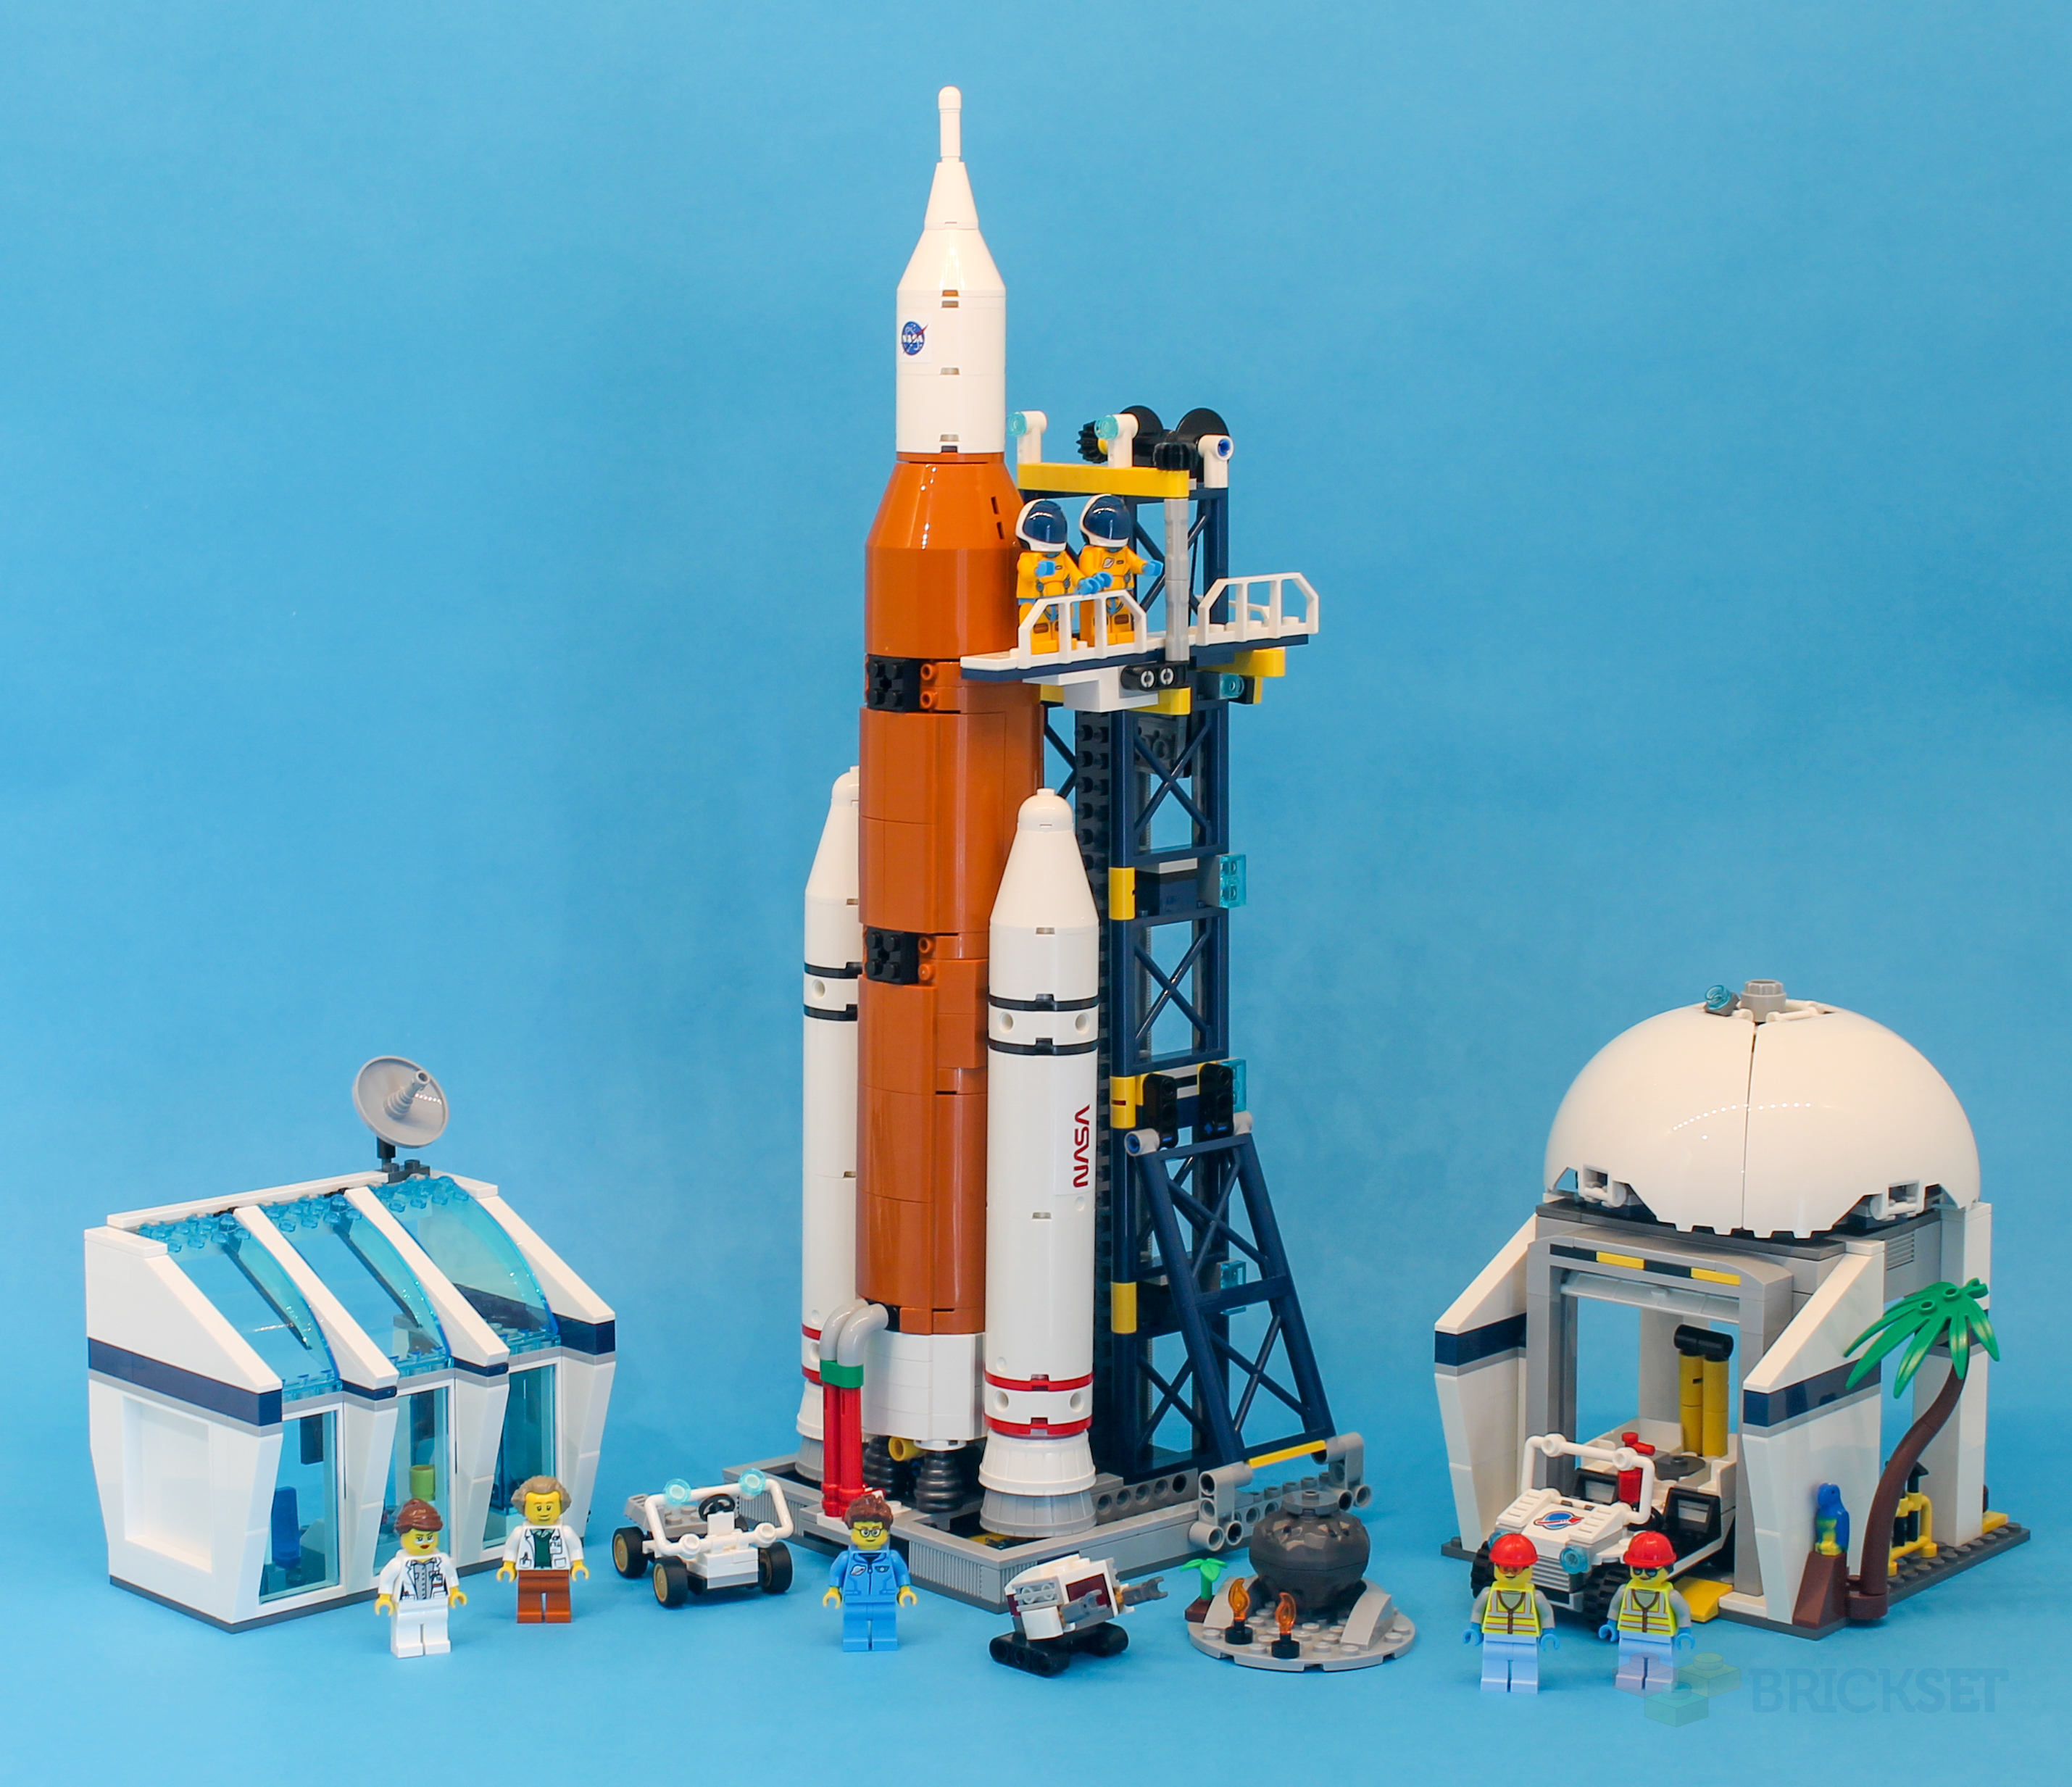 Sip Pickering Intacto Review: 60351 Rocket Launch Centre | Brickset: LEGO set guide and database